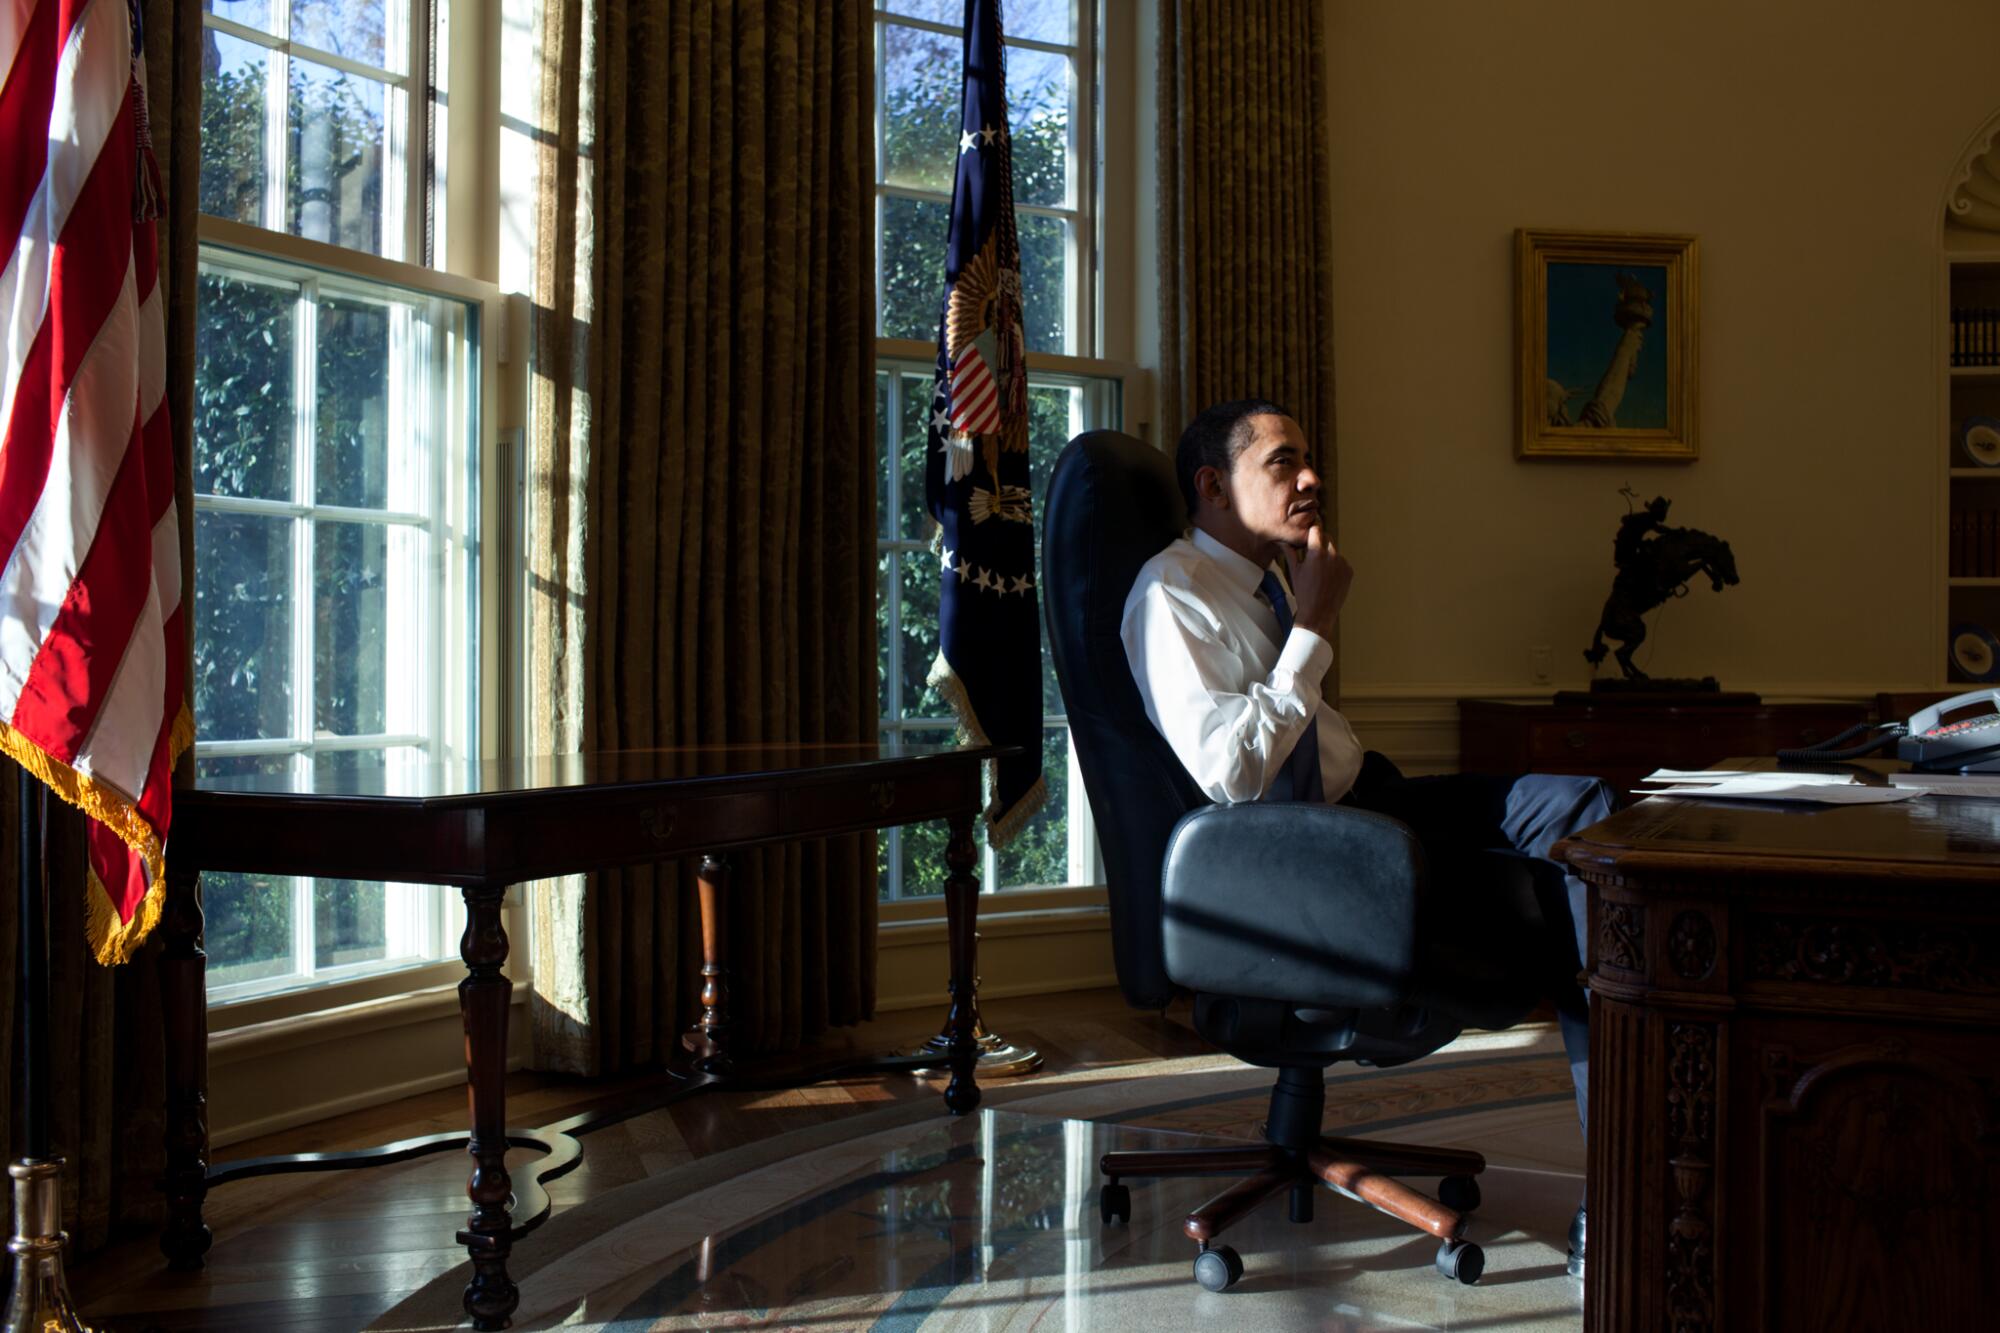 President Barack Obama sits in the Oval Office on his first day in office, Jan. 21, 2009.